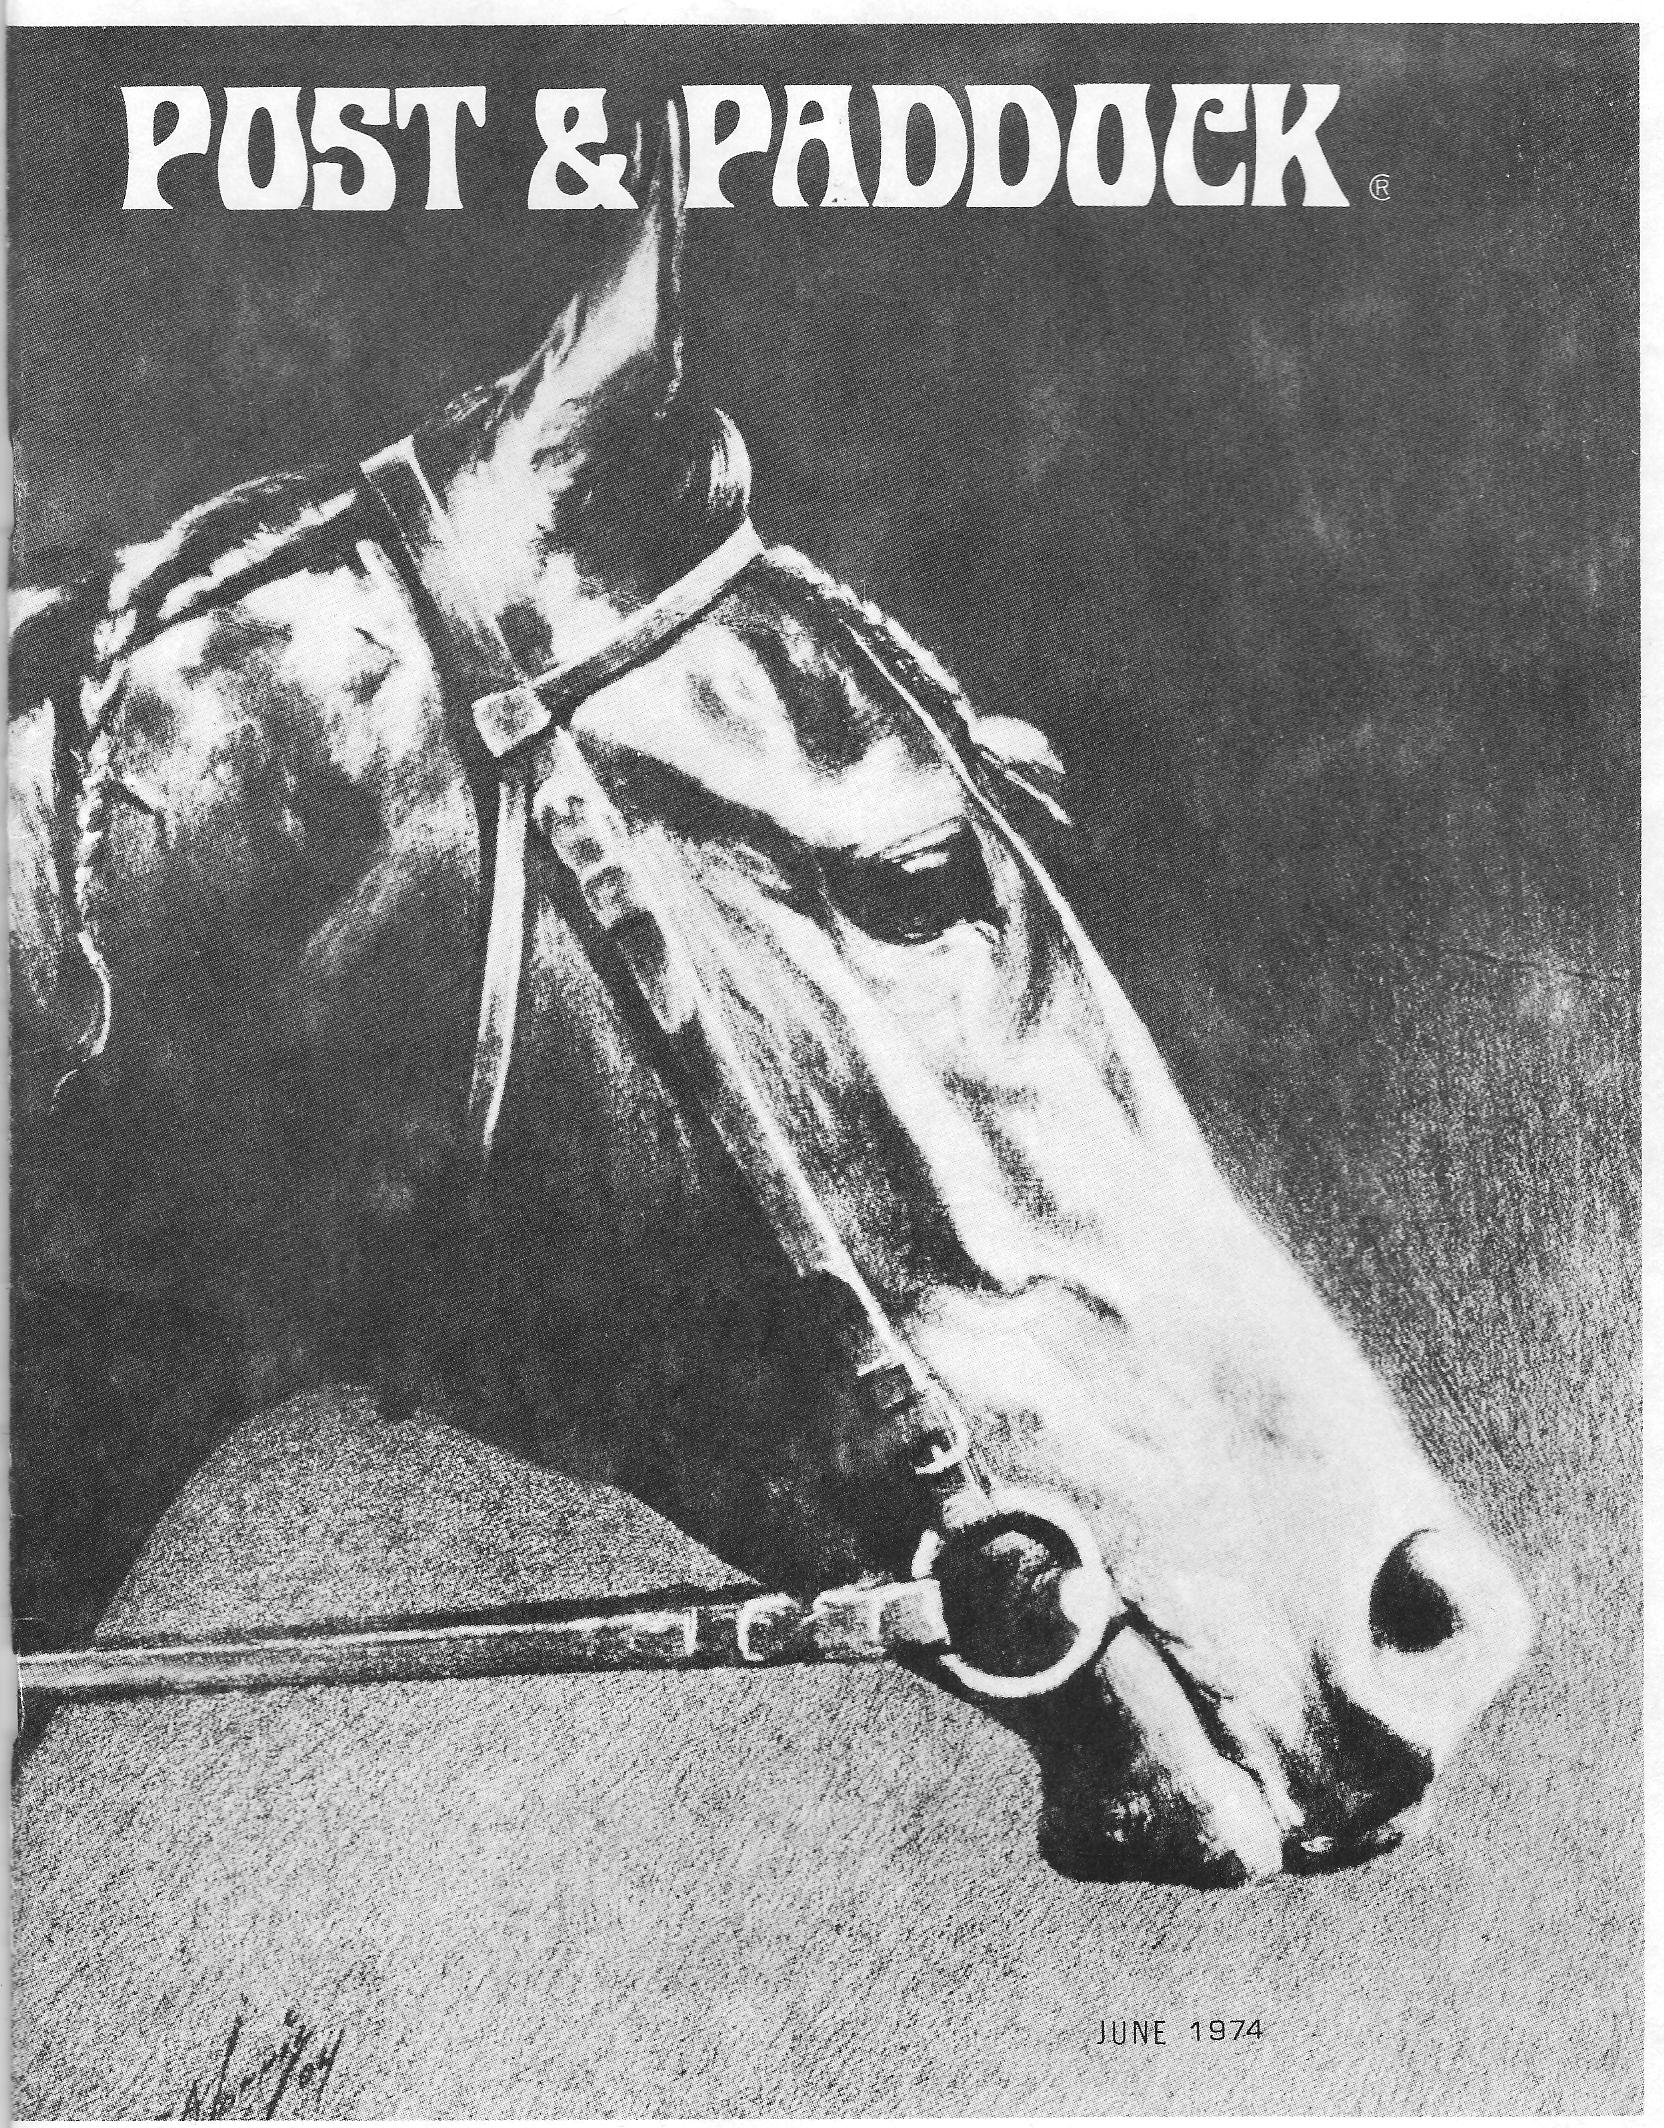 POST & PADDOCK MAGAZINE COVER A Ross paper portrait of the thoroughbred MACCHESNE - a contemporary of great race mare, Beldame)painted 1904 by George Ford Morris(Portraitures of Horses)1952 copyright book)Fordacre Studios Publishing Co. NJ)